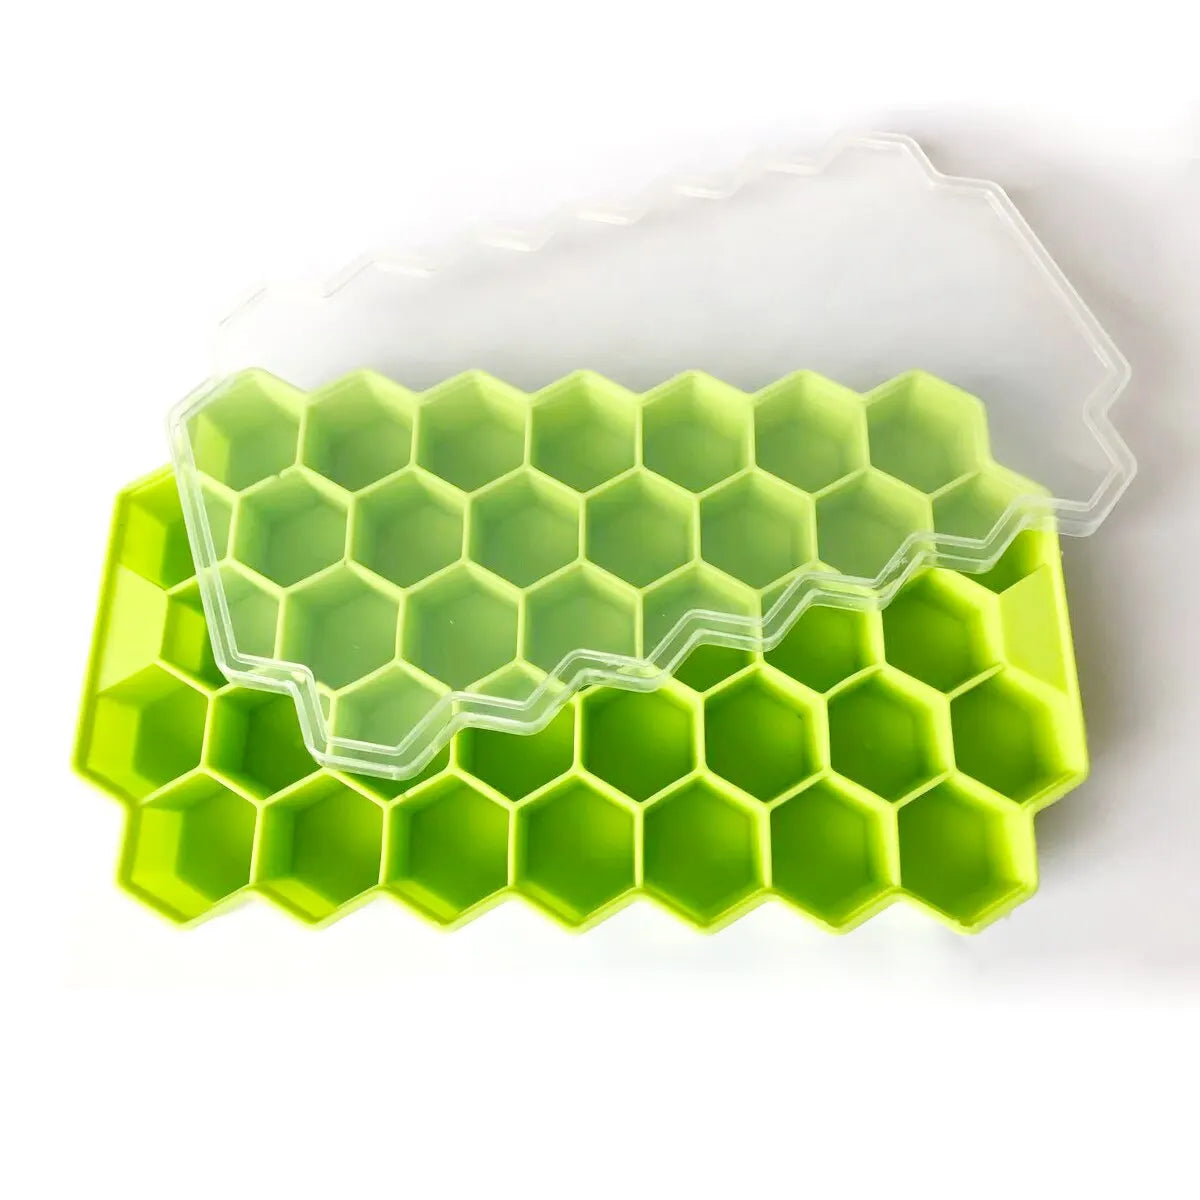 Honeycomb Ice Cube Tray with Spill-Proof Lid: DIY Ice Mold for Homemade Ice Cubes